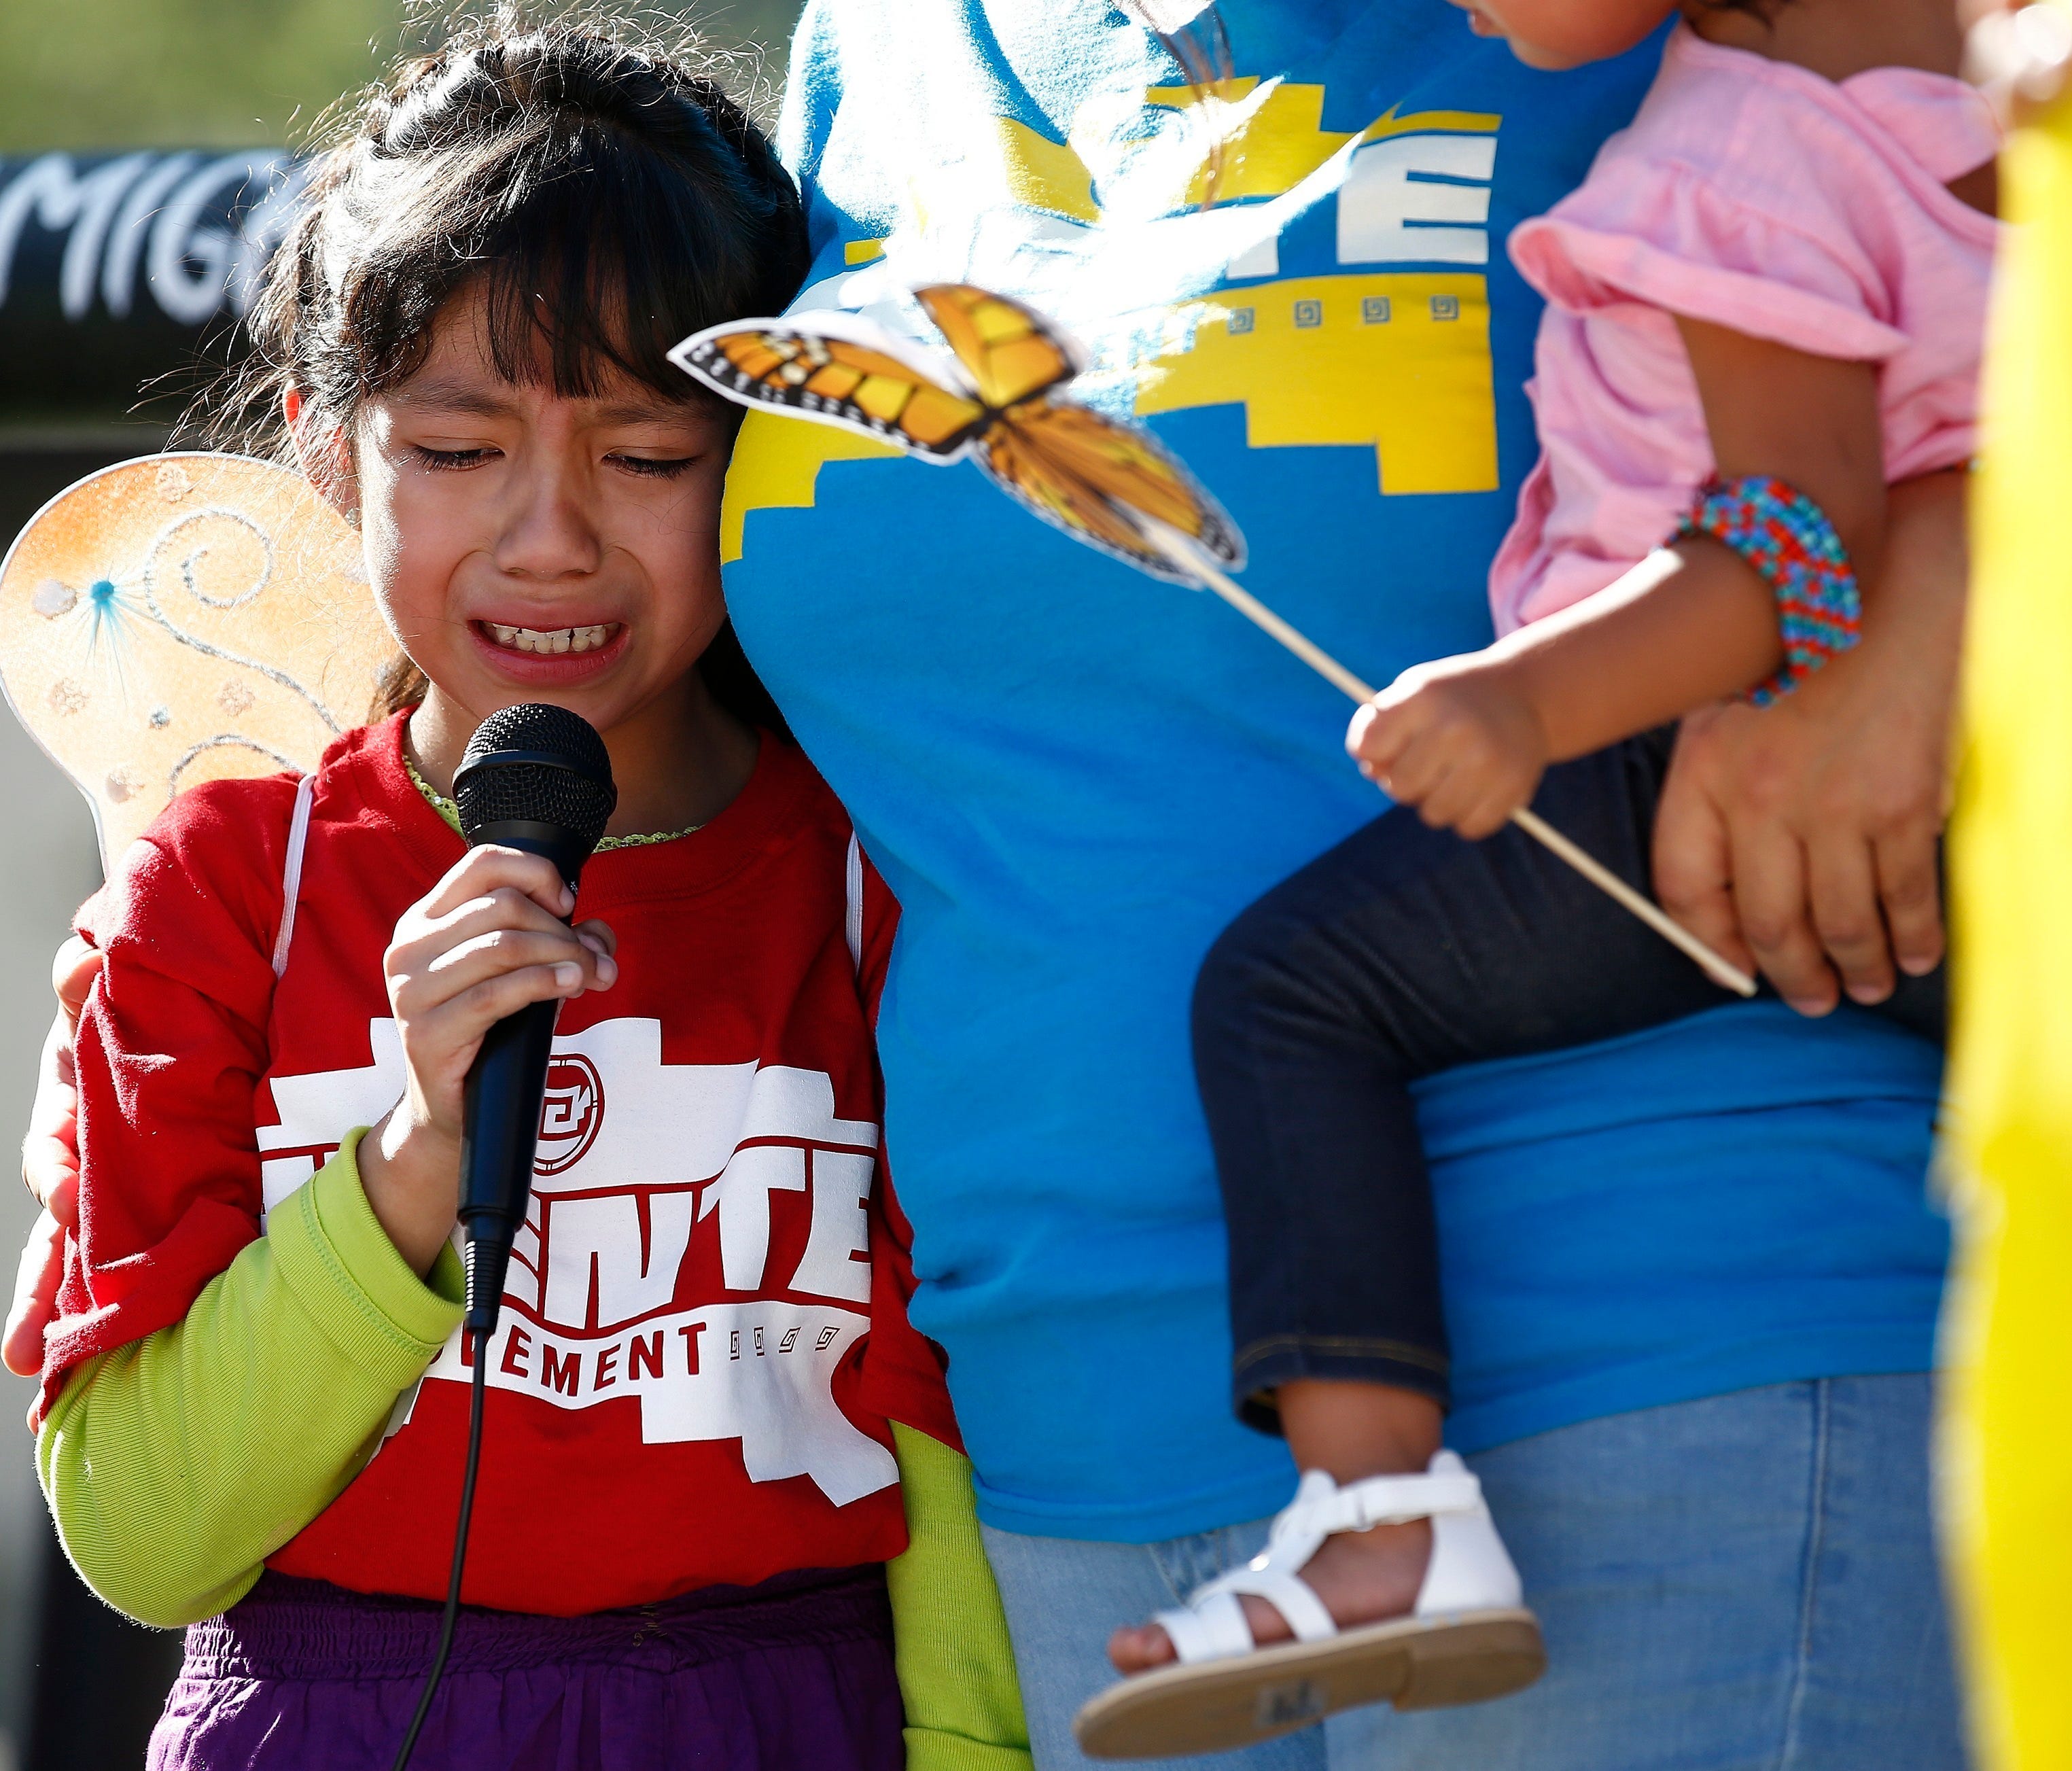 Akemi Vargas, 8, cries as she talks about being separated from her father during an immigration family separation protest in front of the Sandra Day O'Connor U.S. District Court building in Phoenix.